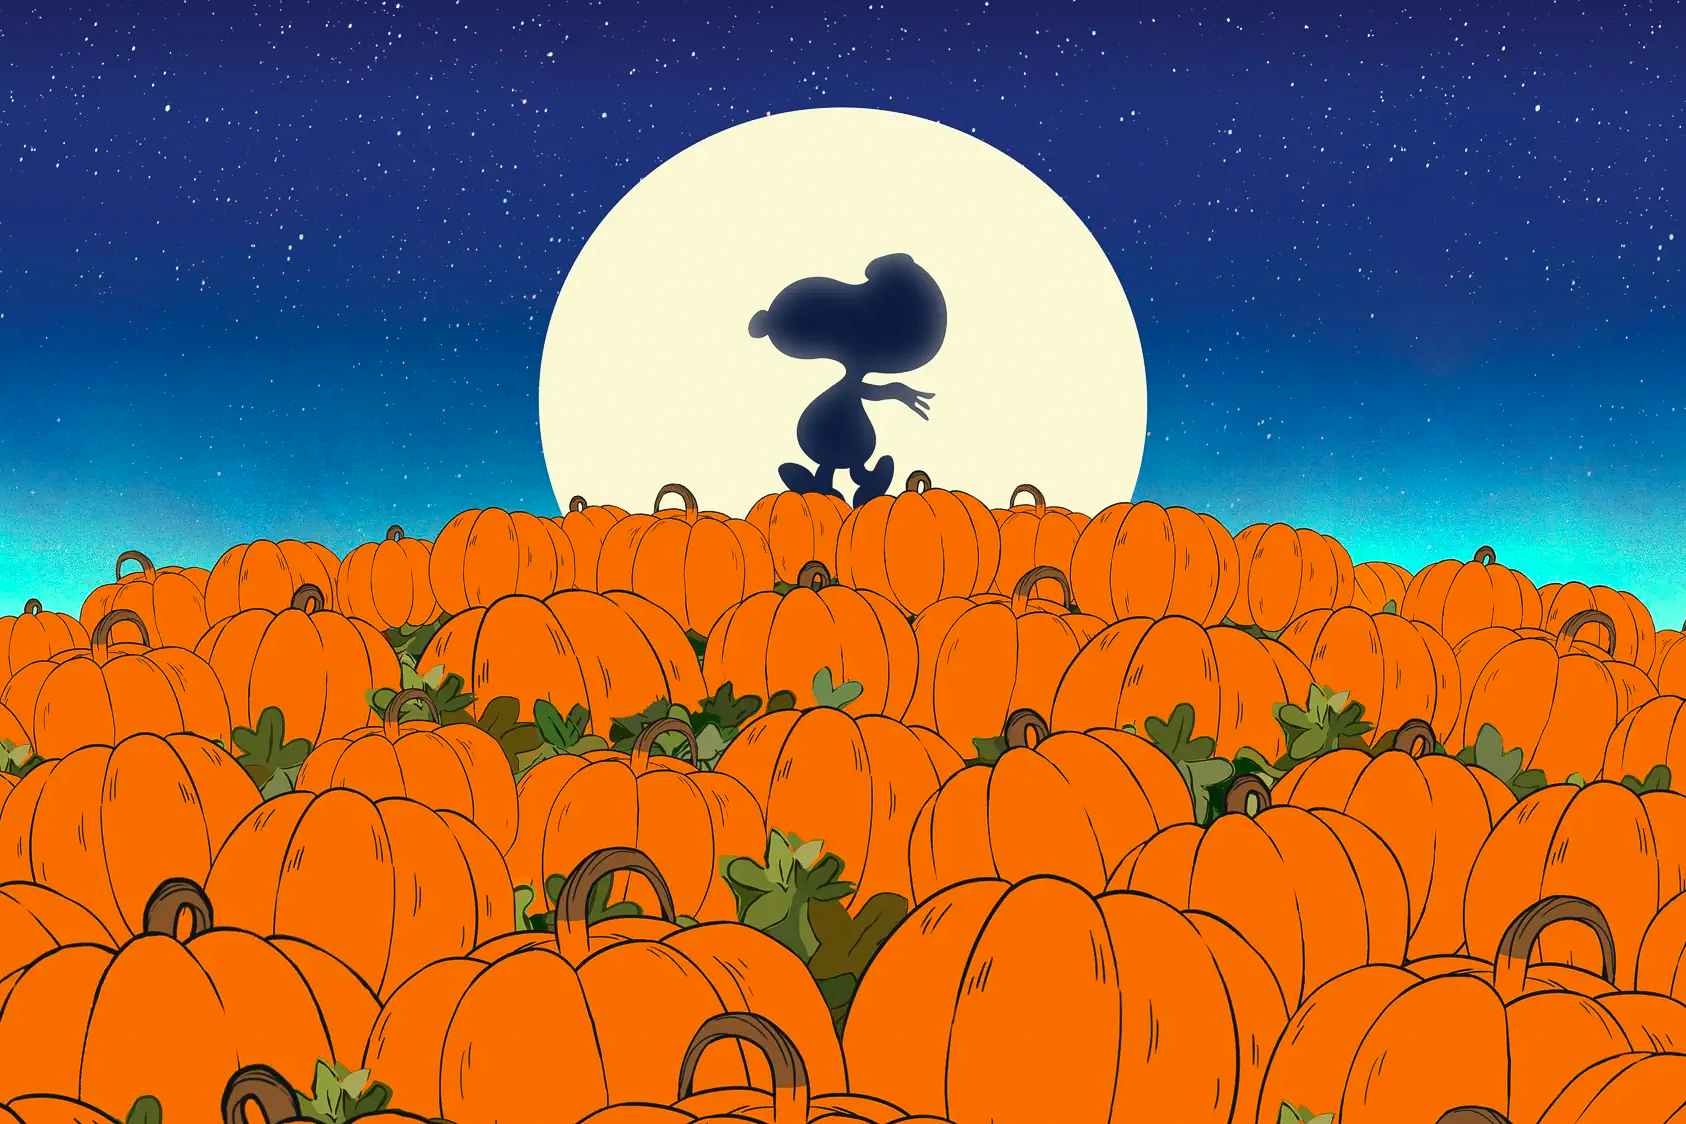 A still from the preview of It's The Great Pumpkin Charlie Brown Halloween special on the Apple TV+ website.